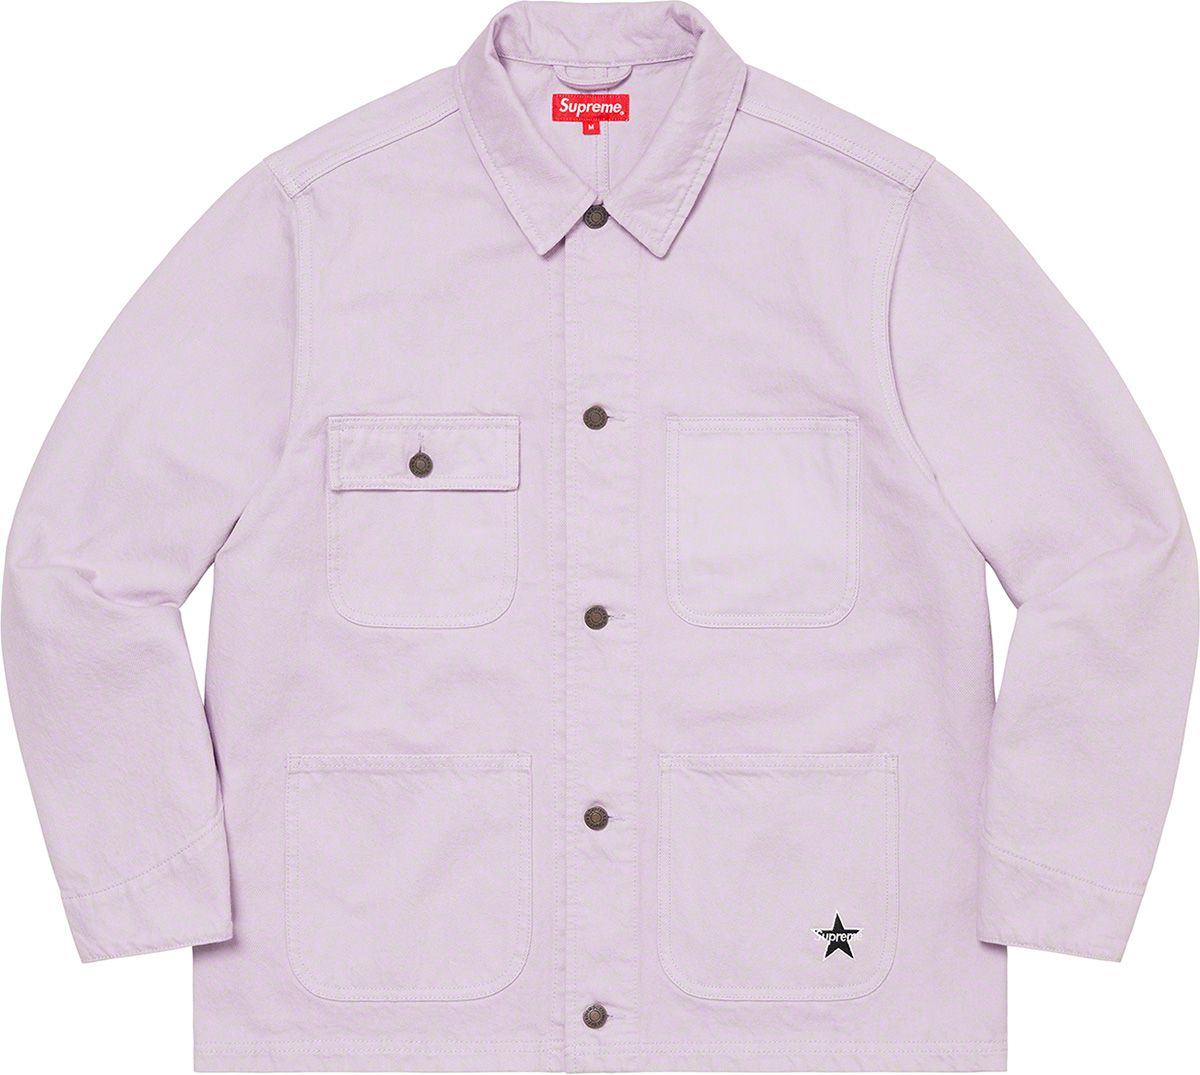 Supreme Gummo Coaches Jacket Red